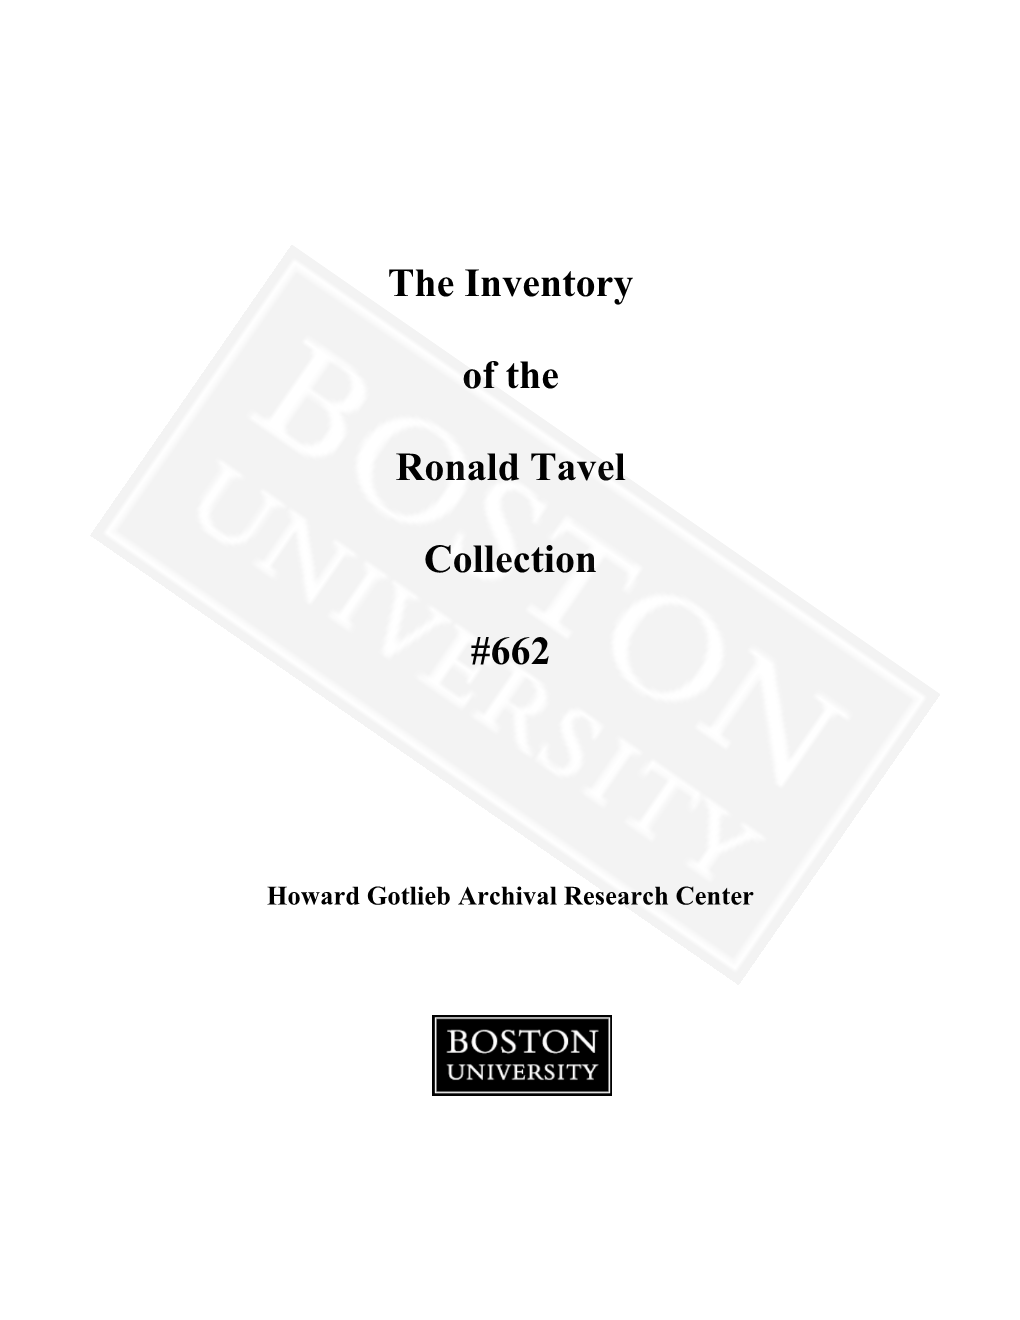 The Inventory of the Ronald Tavel Collection #662